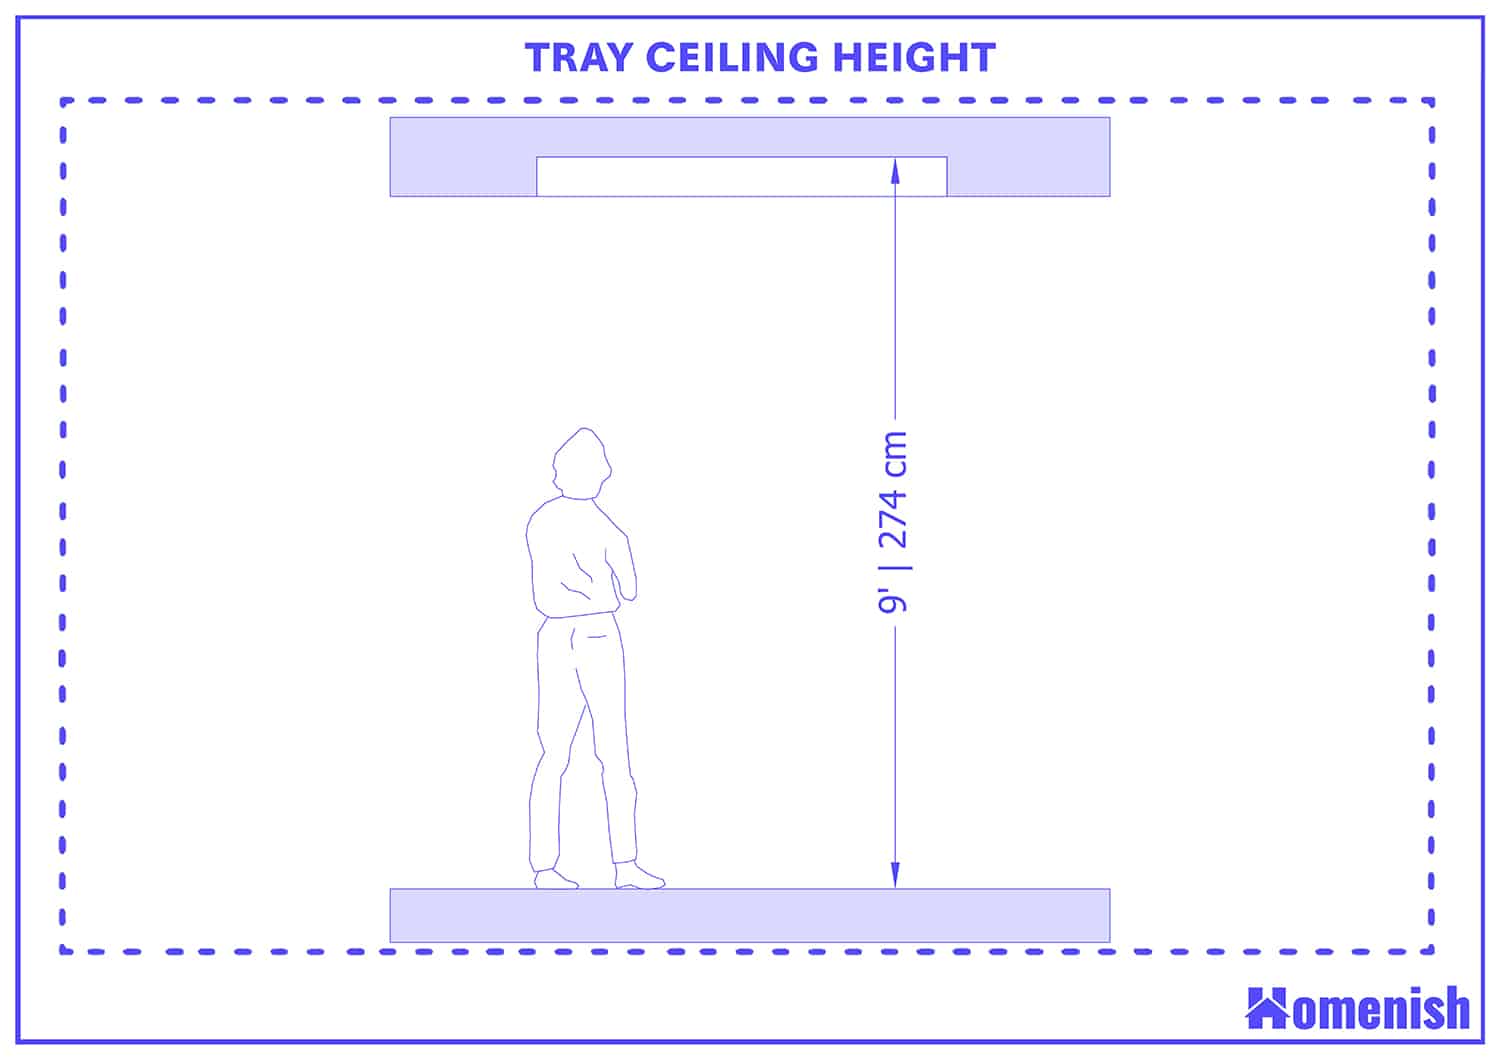 Tray Ceiling Height